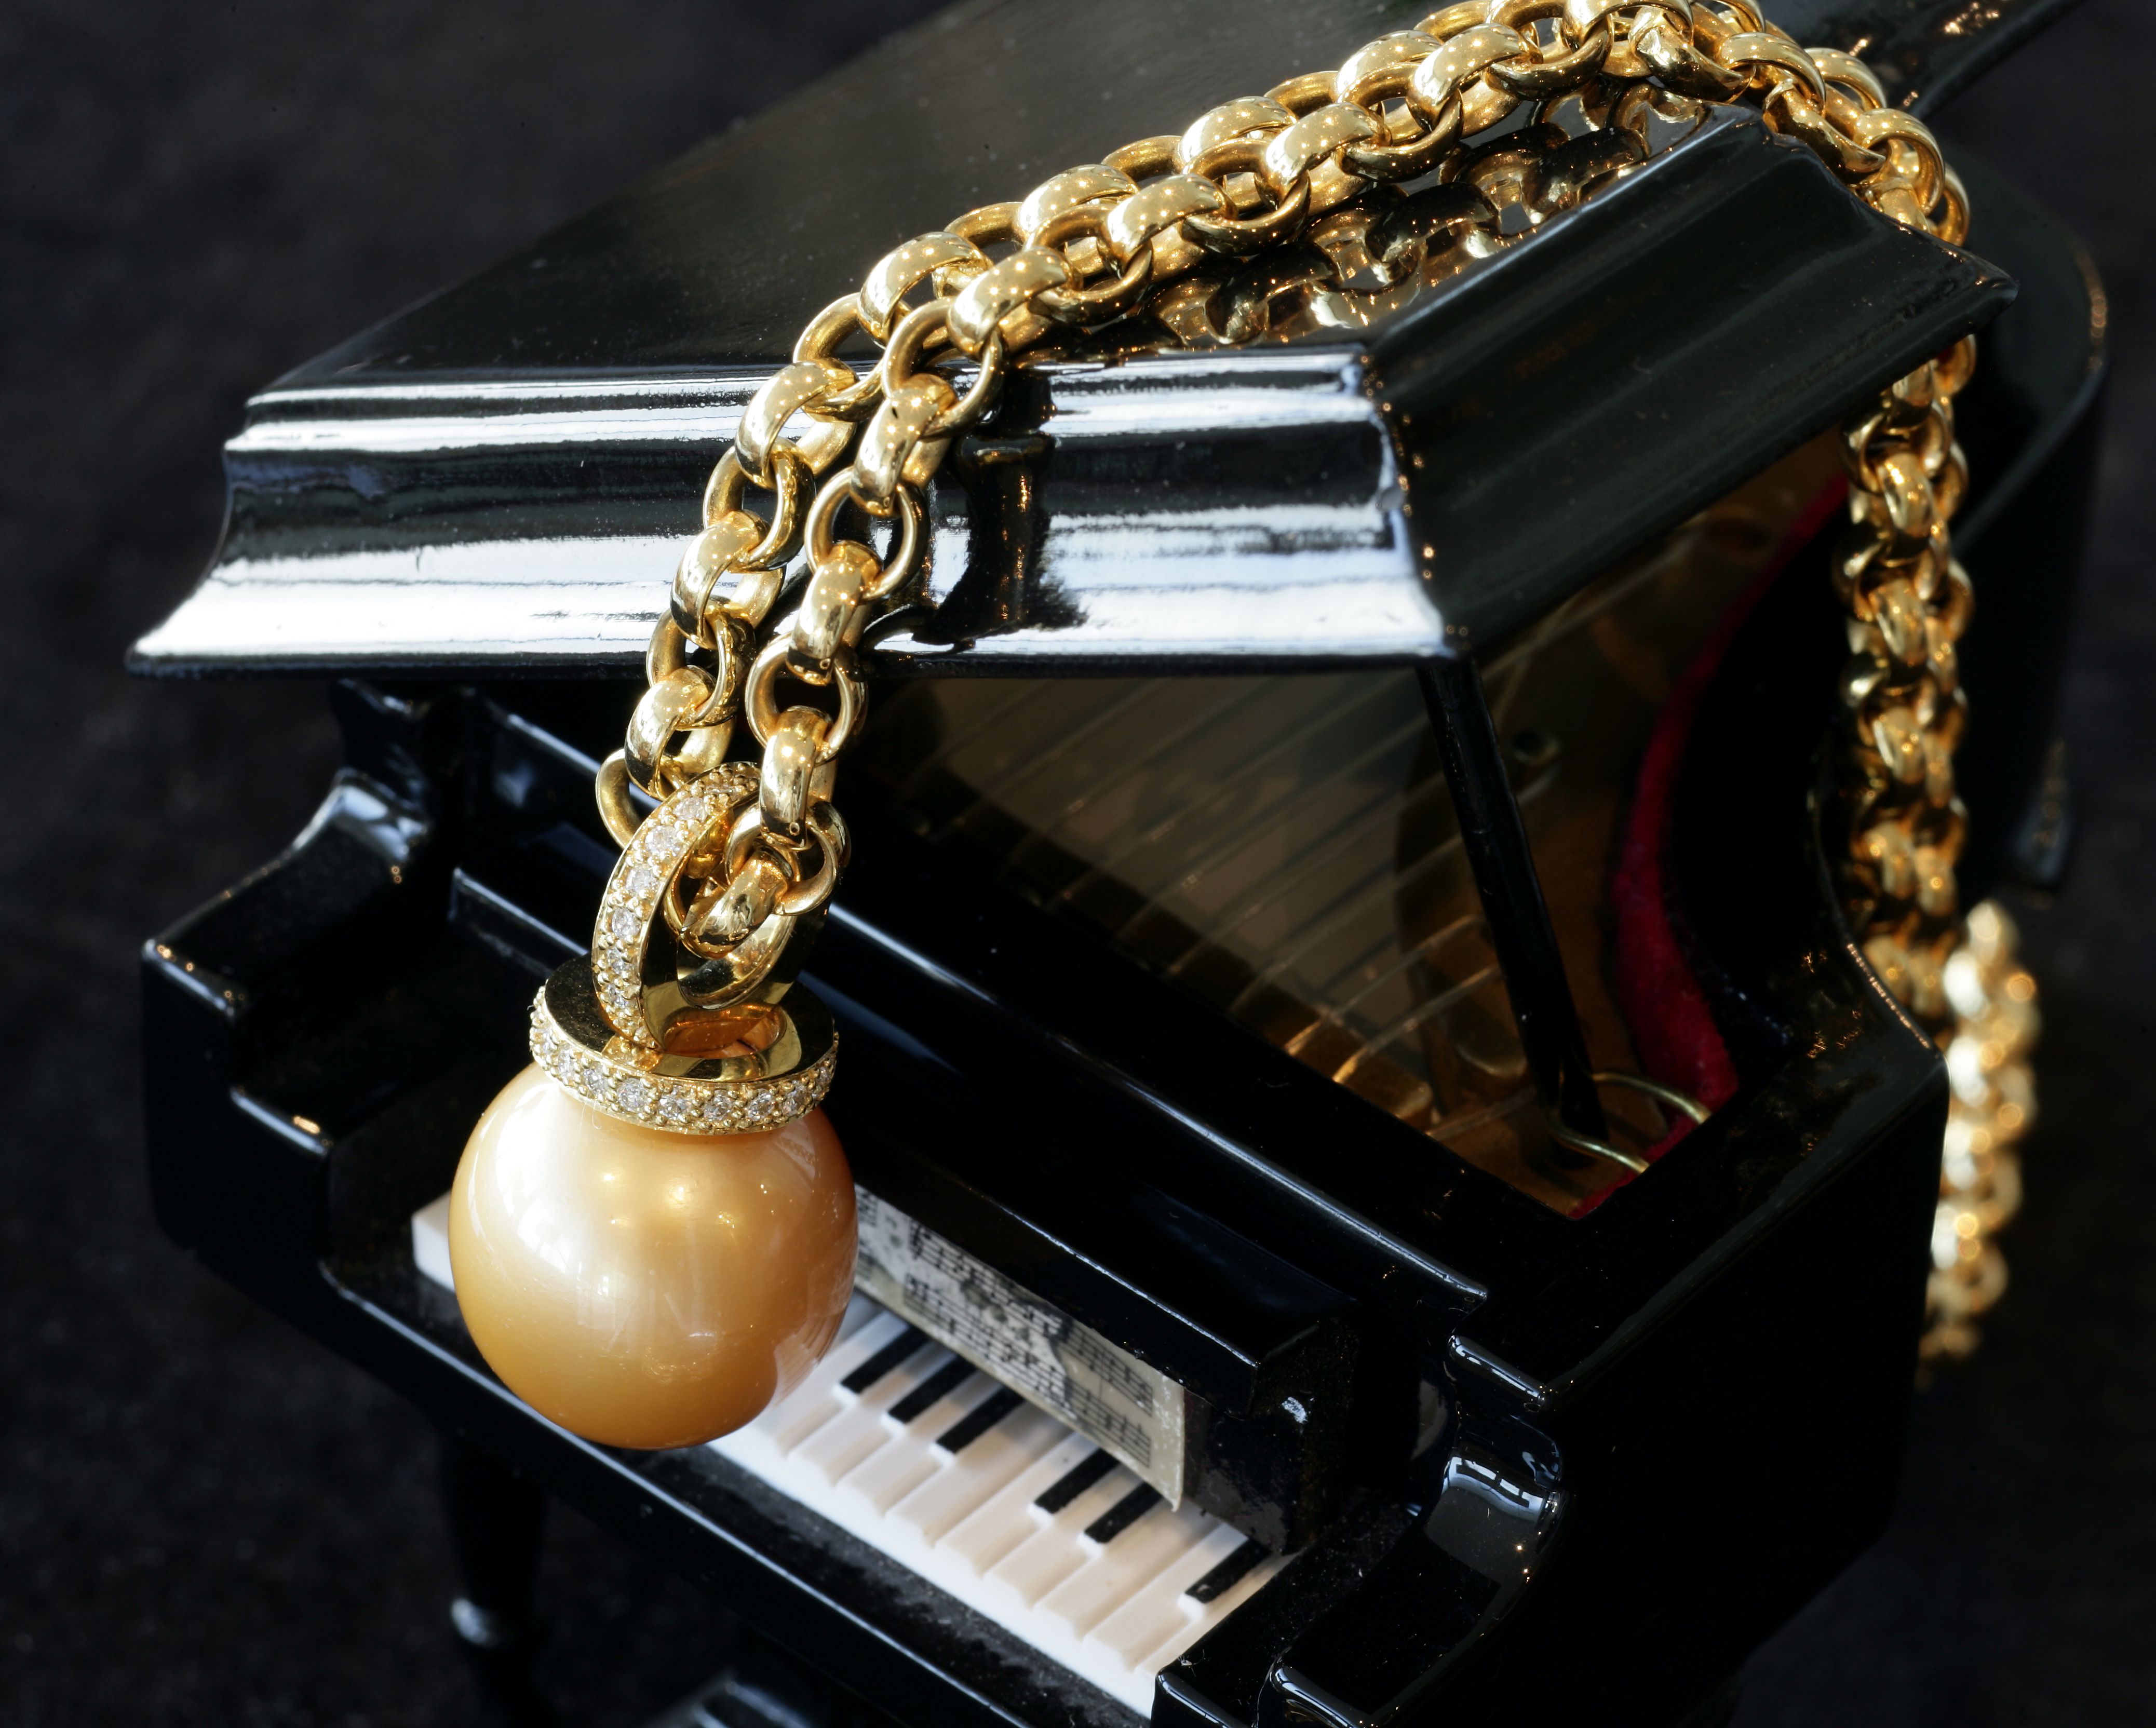 Pearl necklace on piano.jpg